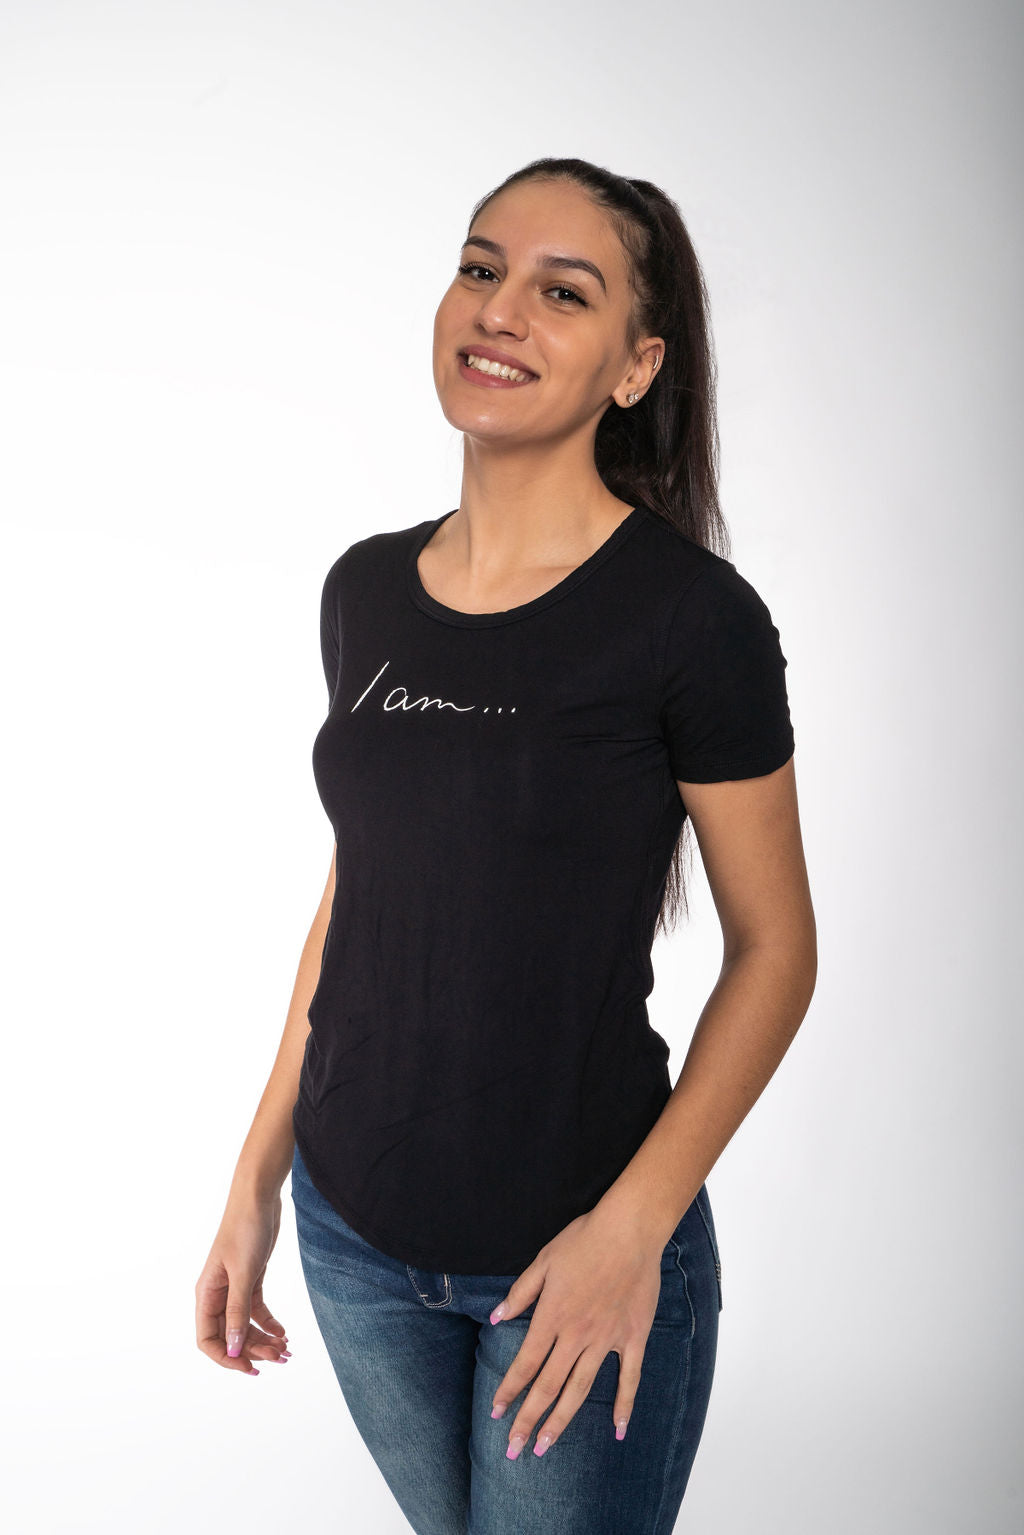 I am... Women's T-Shirt (Limited Edition)